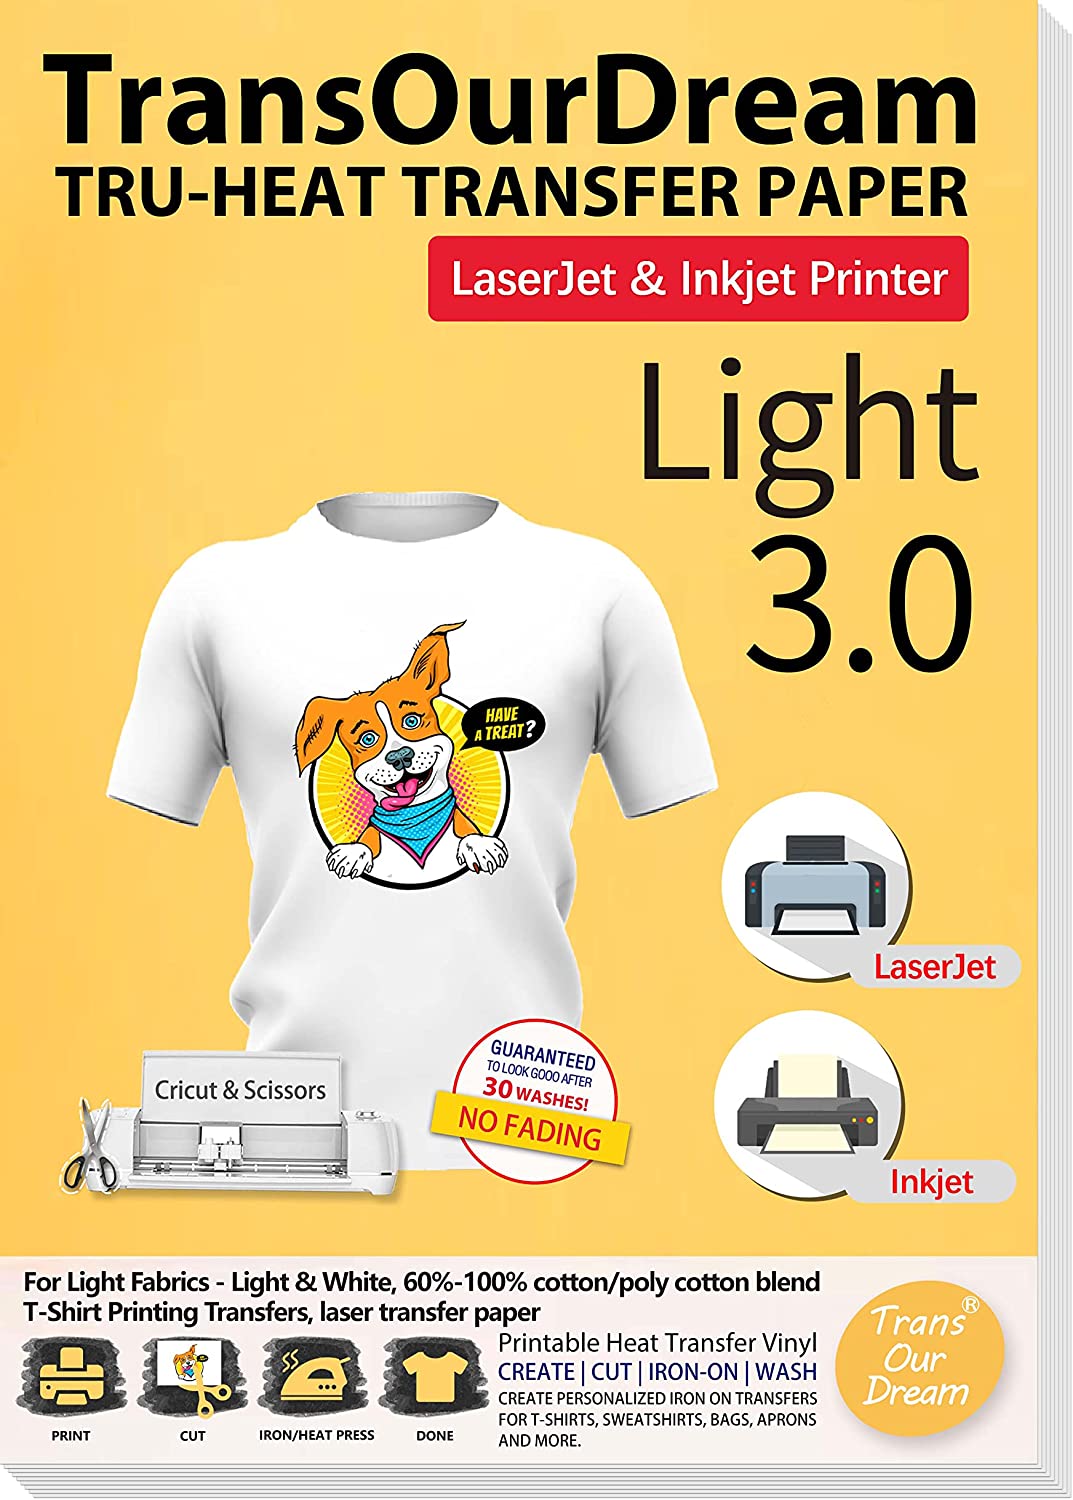 printers for t shirt transfers review